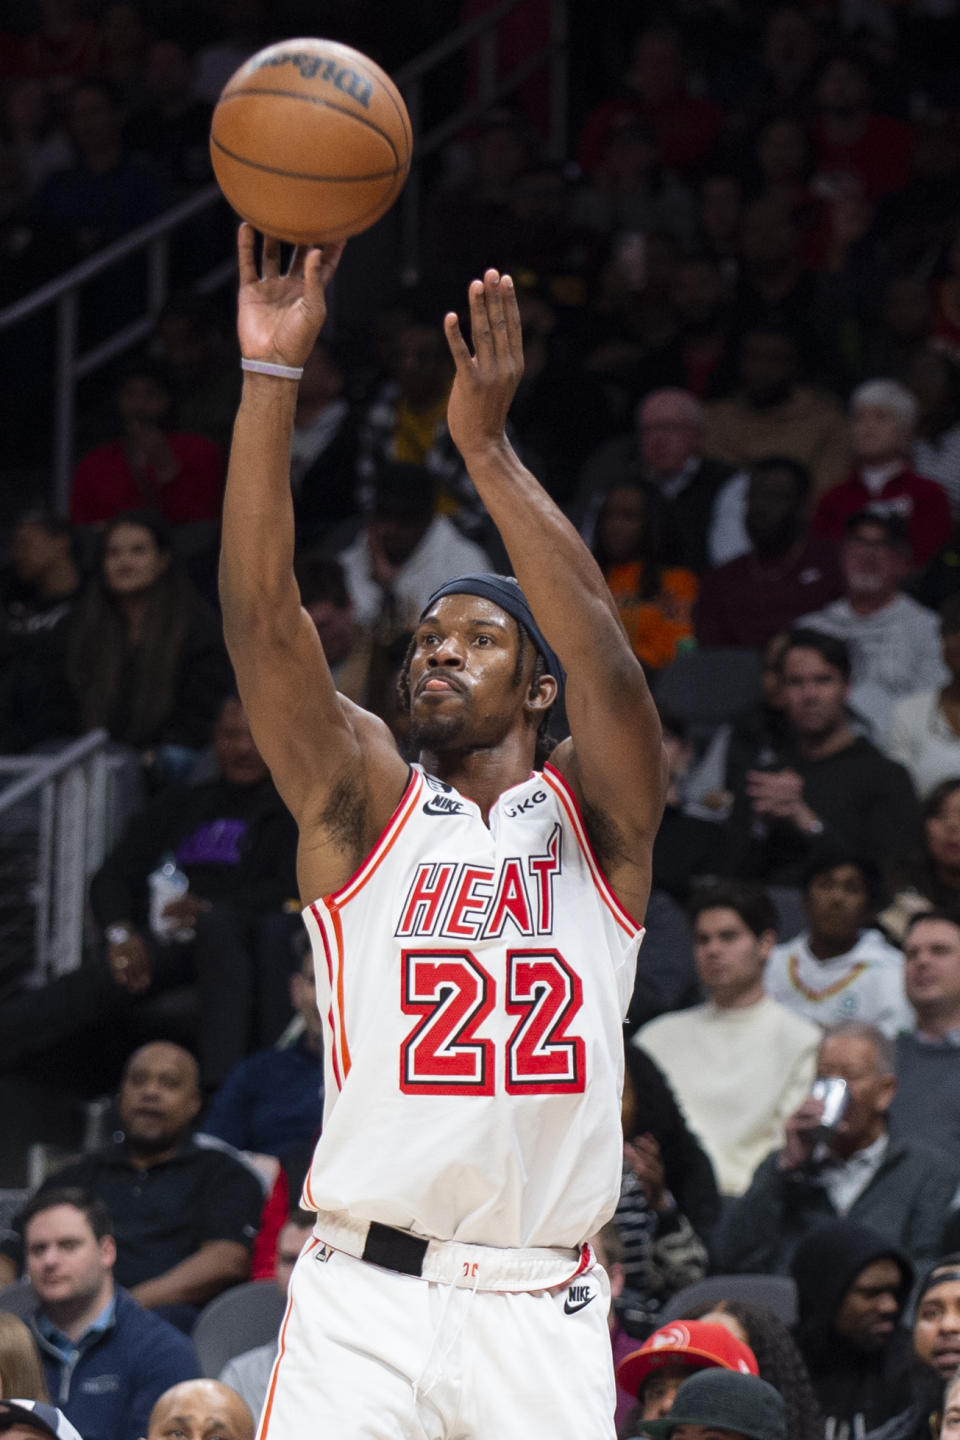 Miami Heat forward Jimmy Butler shoots a 3-point basket during the second half of an NBA basketball game against the Atlanta Hawks, Monday, Jan. 16, 2023, in Atlanta. (AP Photo/Hakim Wright Sr.)